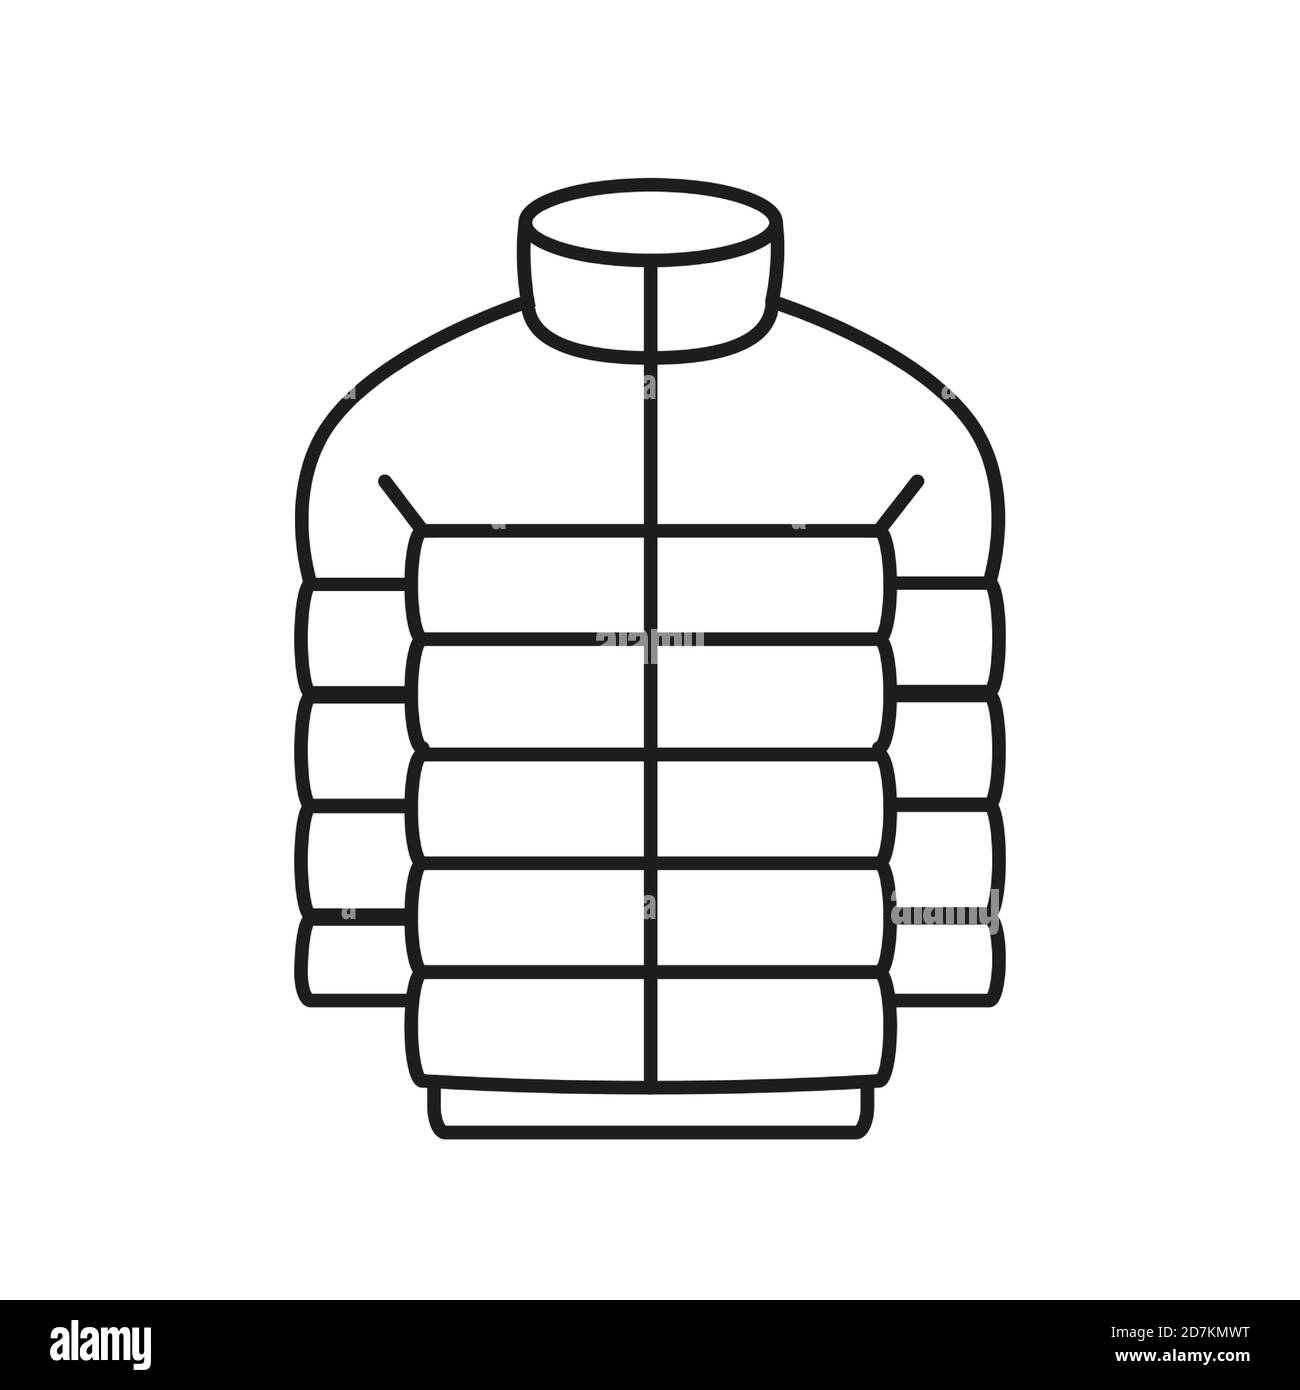 winter jacket icon element of winter clothes icon for mobile